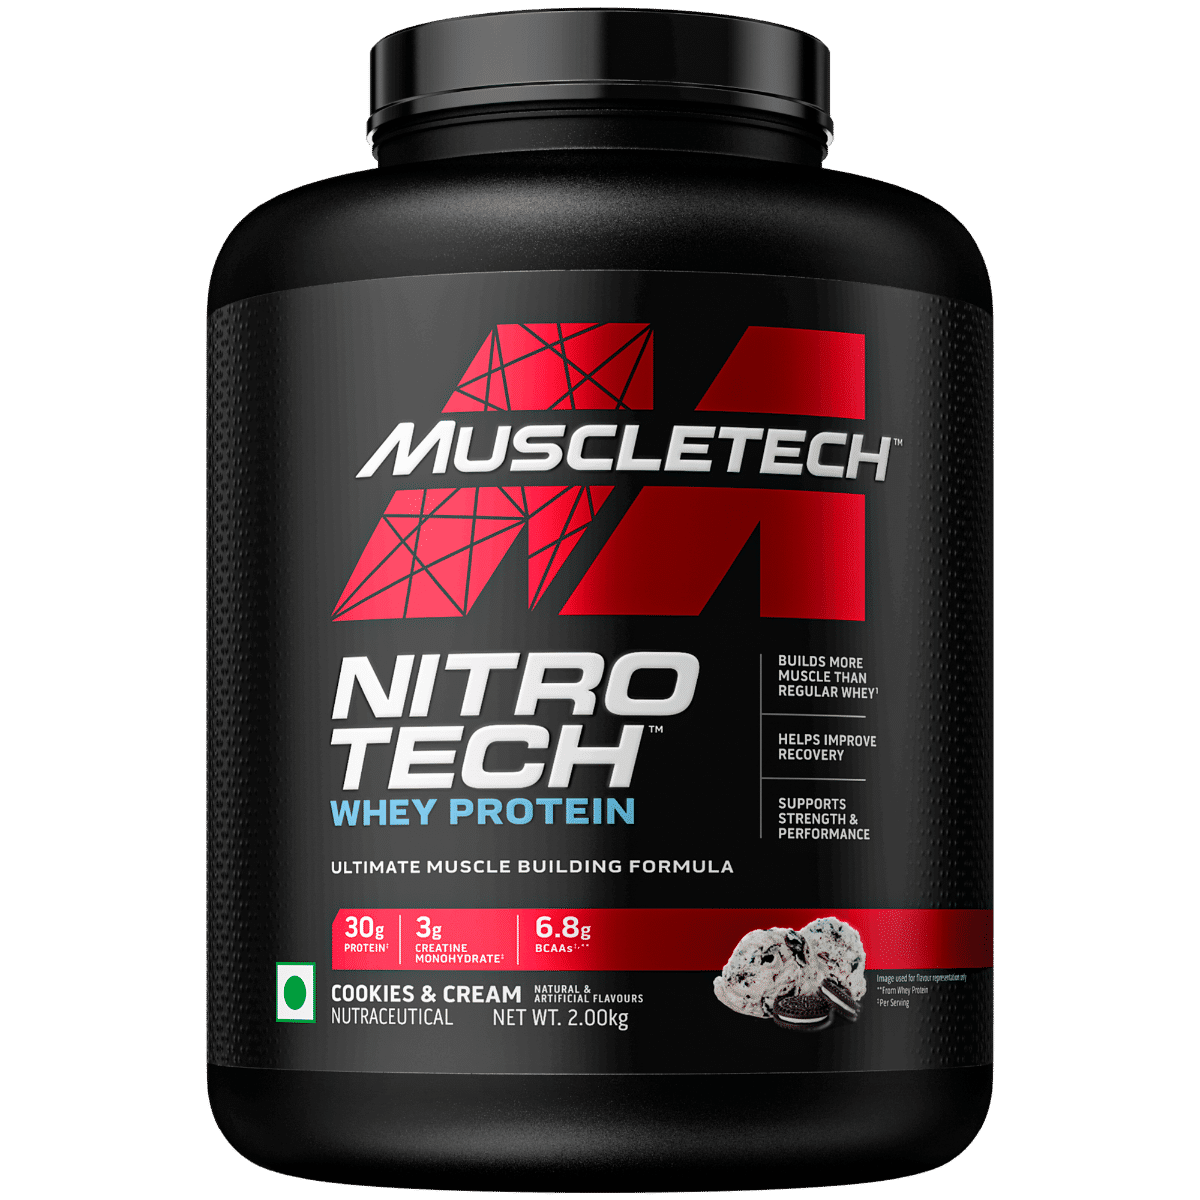 Muscletech Nitrotech Whey Protein Cookies & Cream Flavour Powder, 2 kg, Pack of 1 